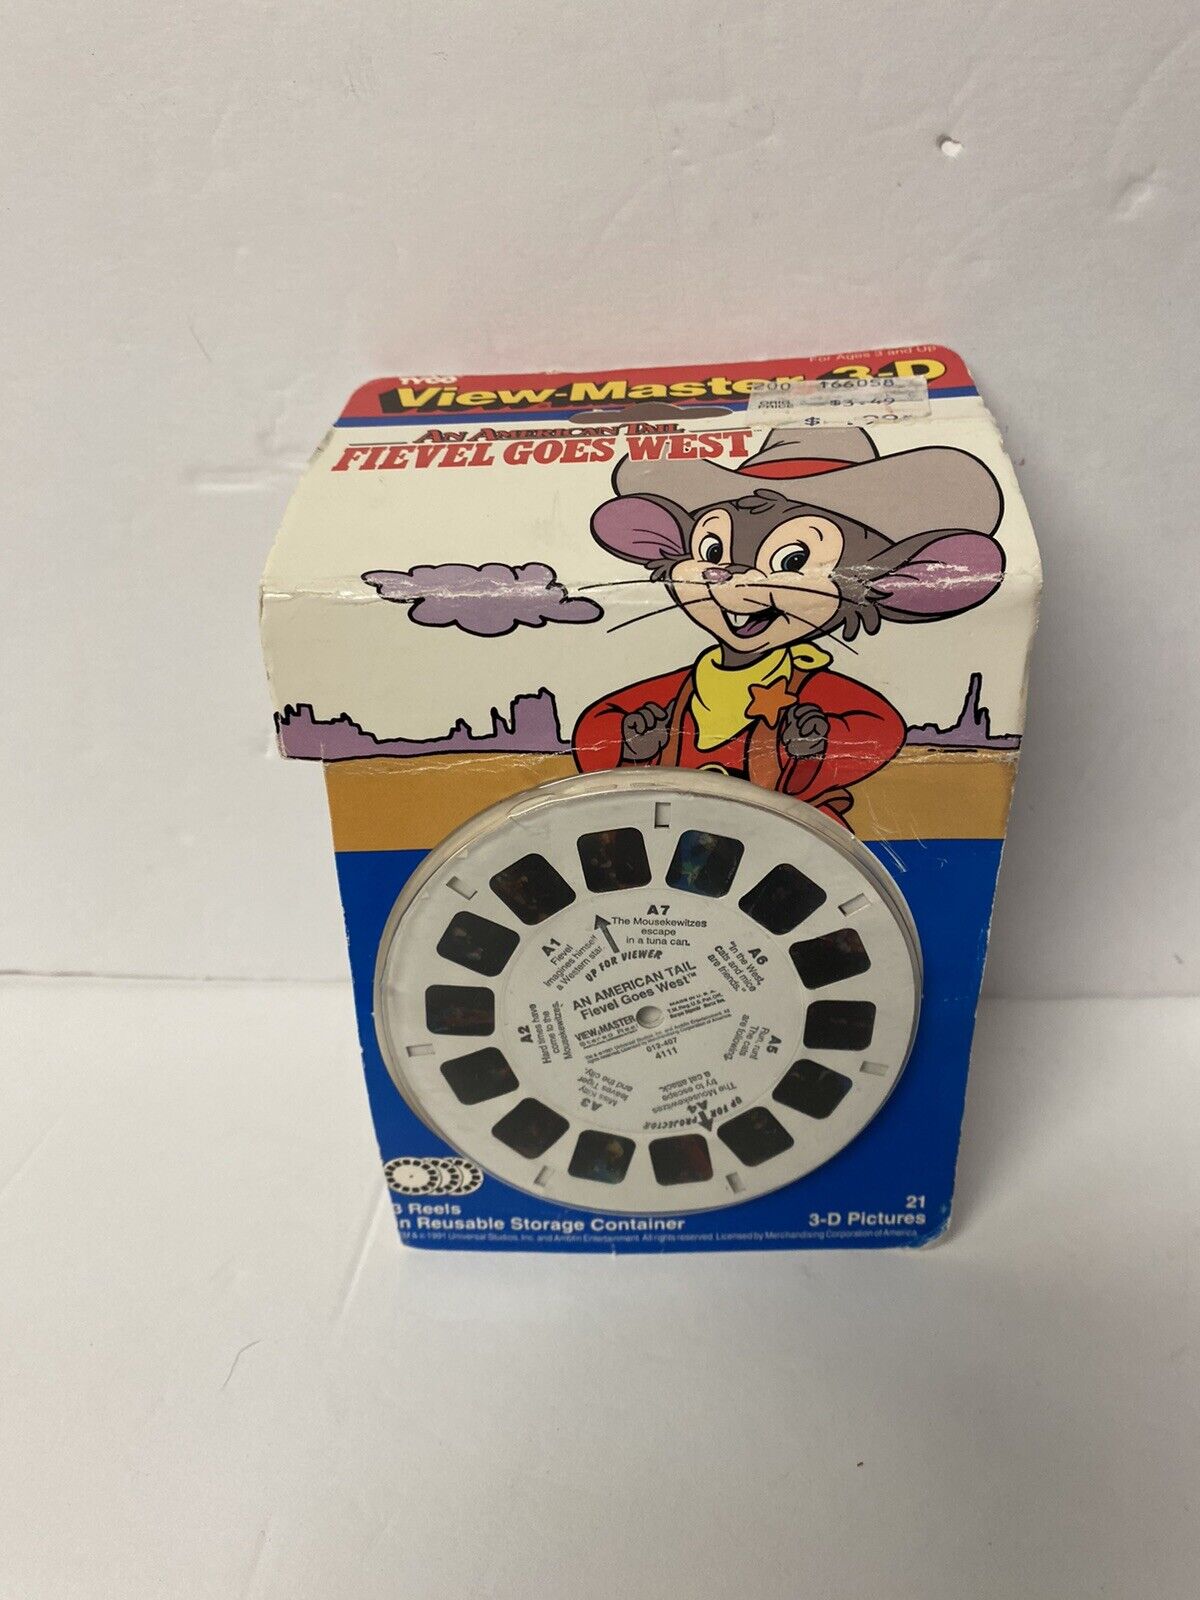 View-Master FIEVEL GOES WEST mouse cartoon movie AMERICAN TAIL 1991 SEALED